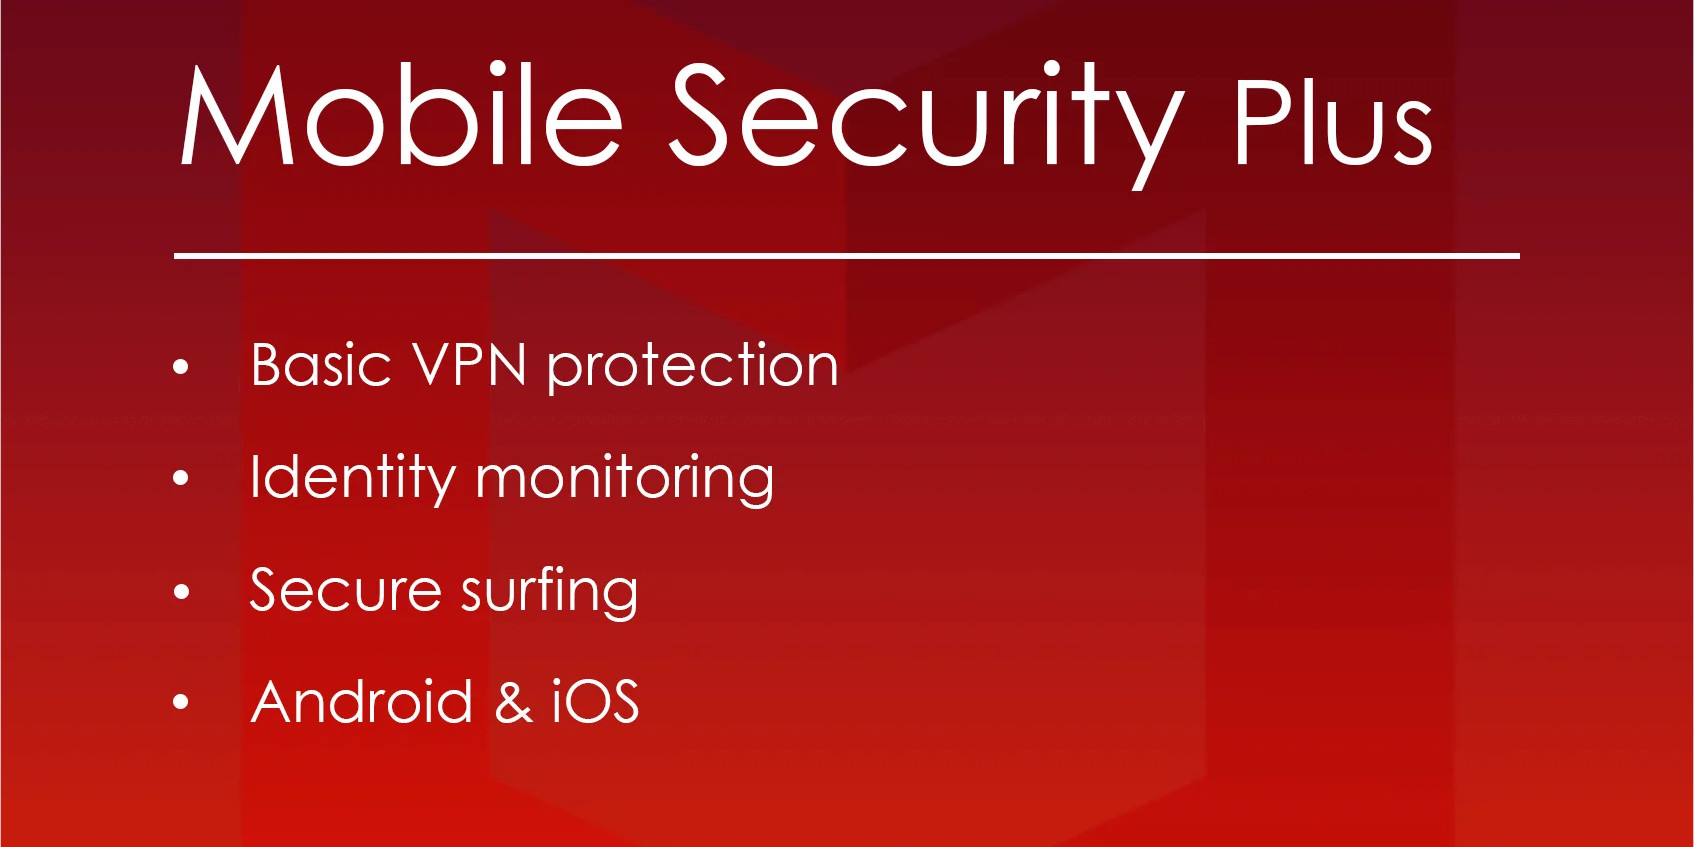 McAfee Mobile Security Plus VPN Key (1 Year / Unlimited Devices) [USD 6.75]